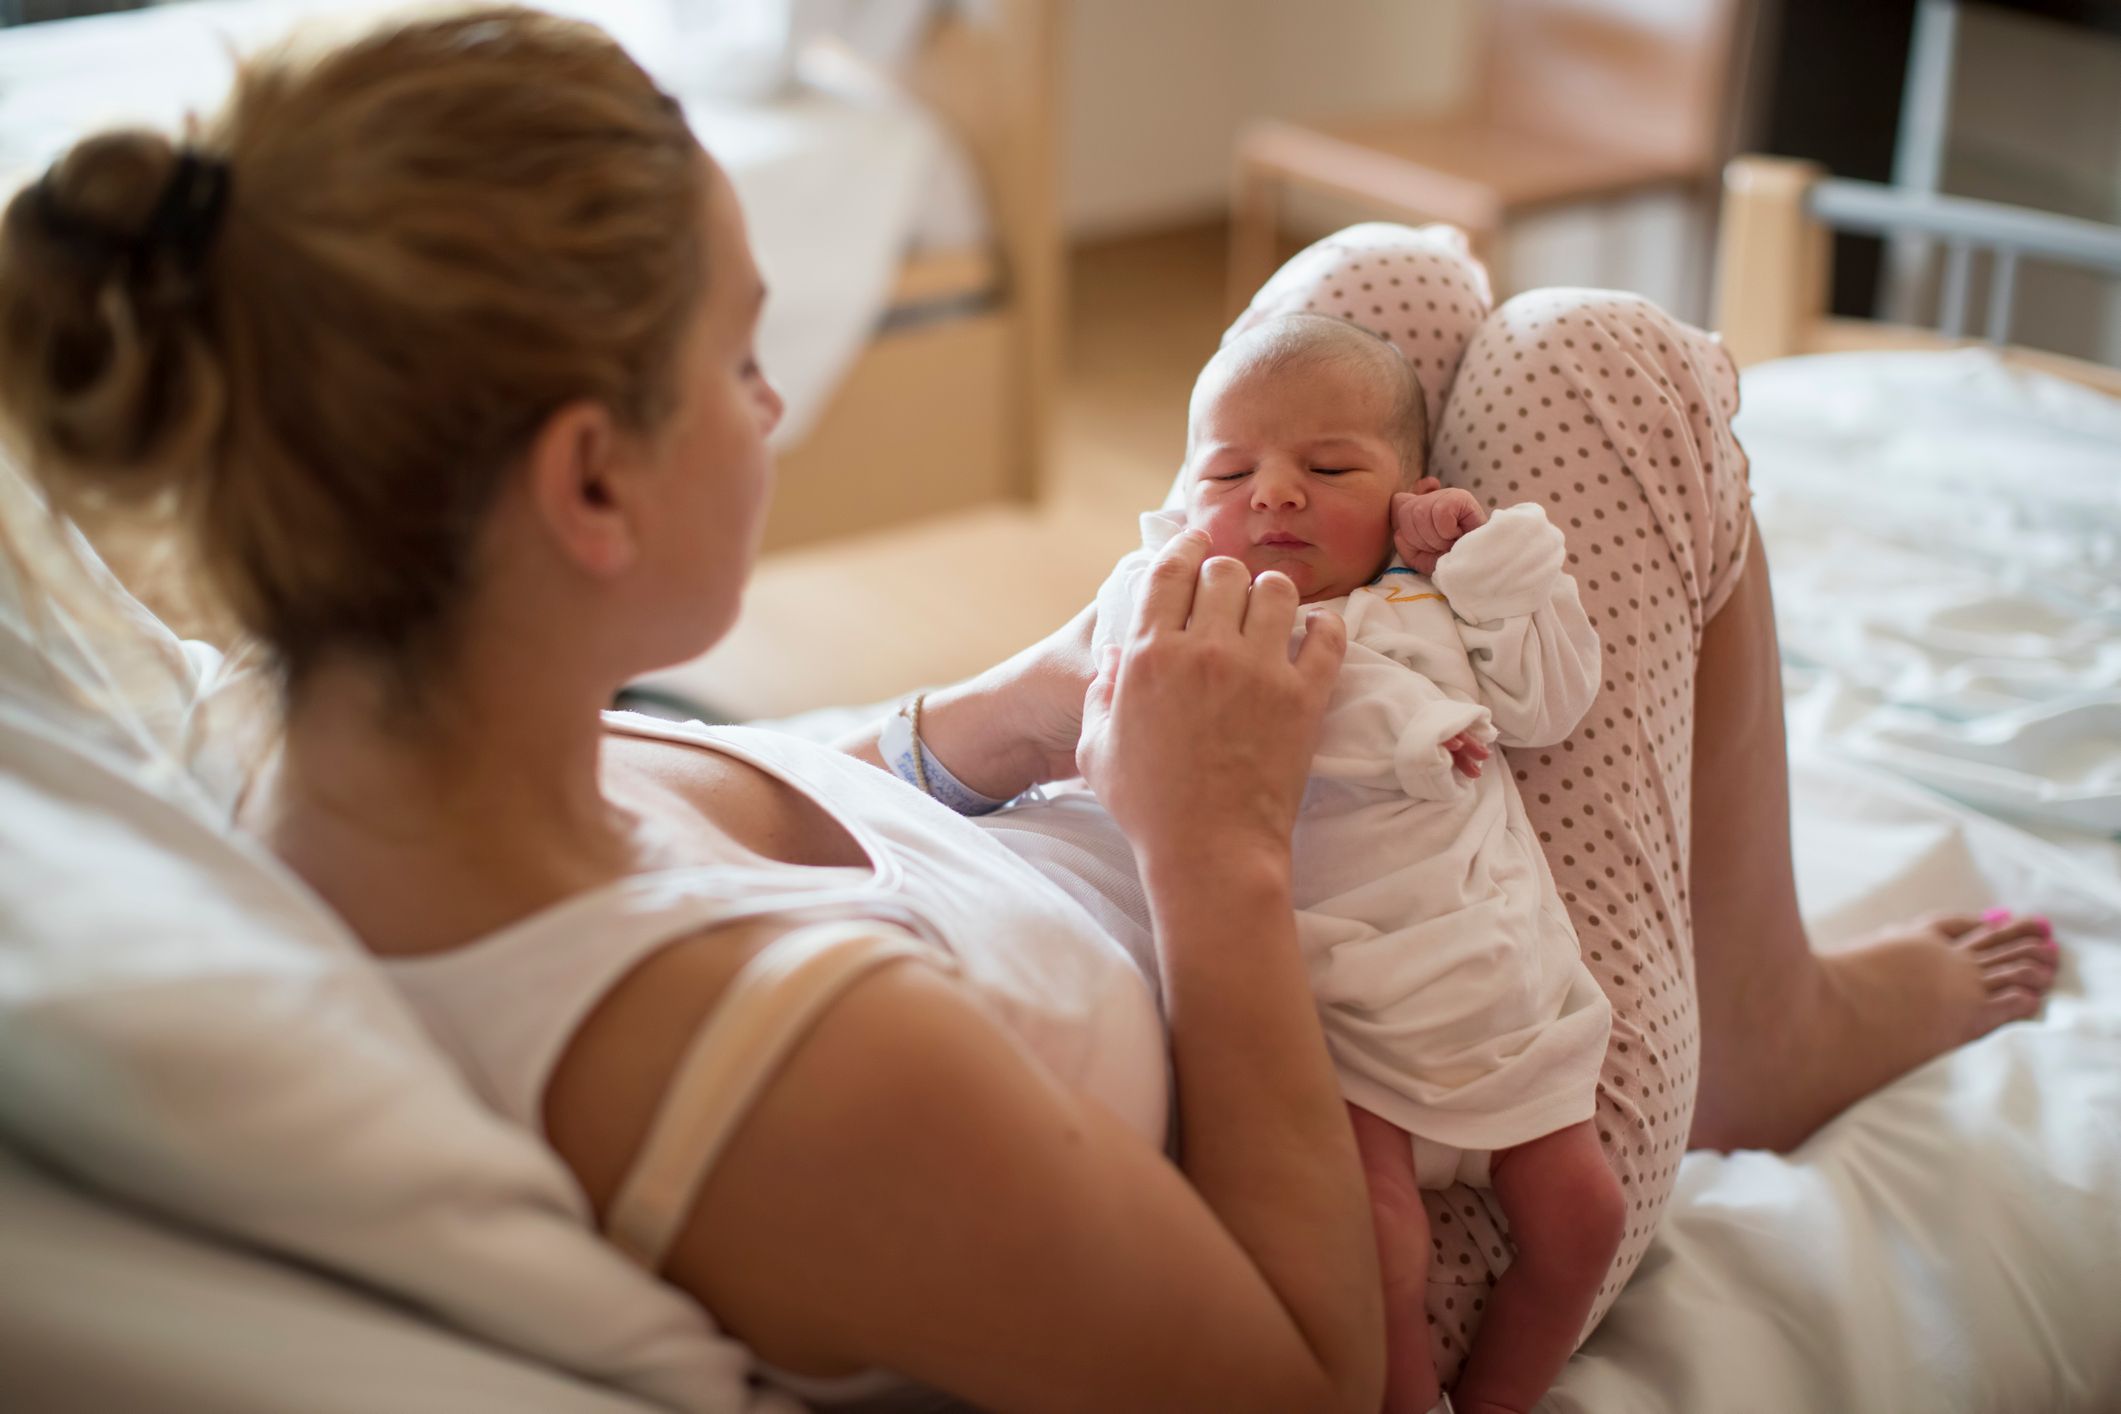 A mom holding her newborn baby in a hospital room. | Source: Shutterstock